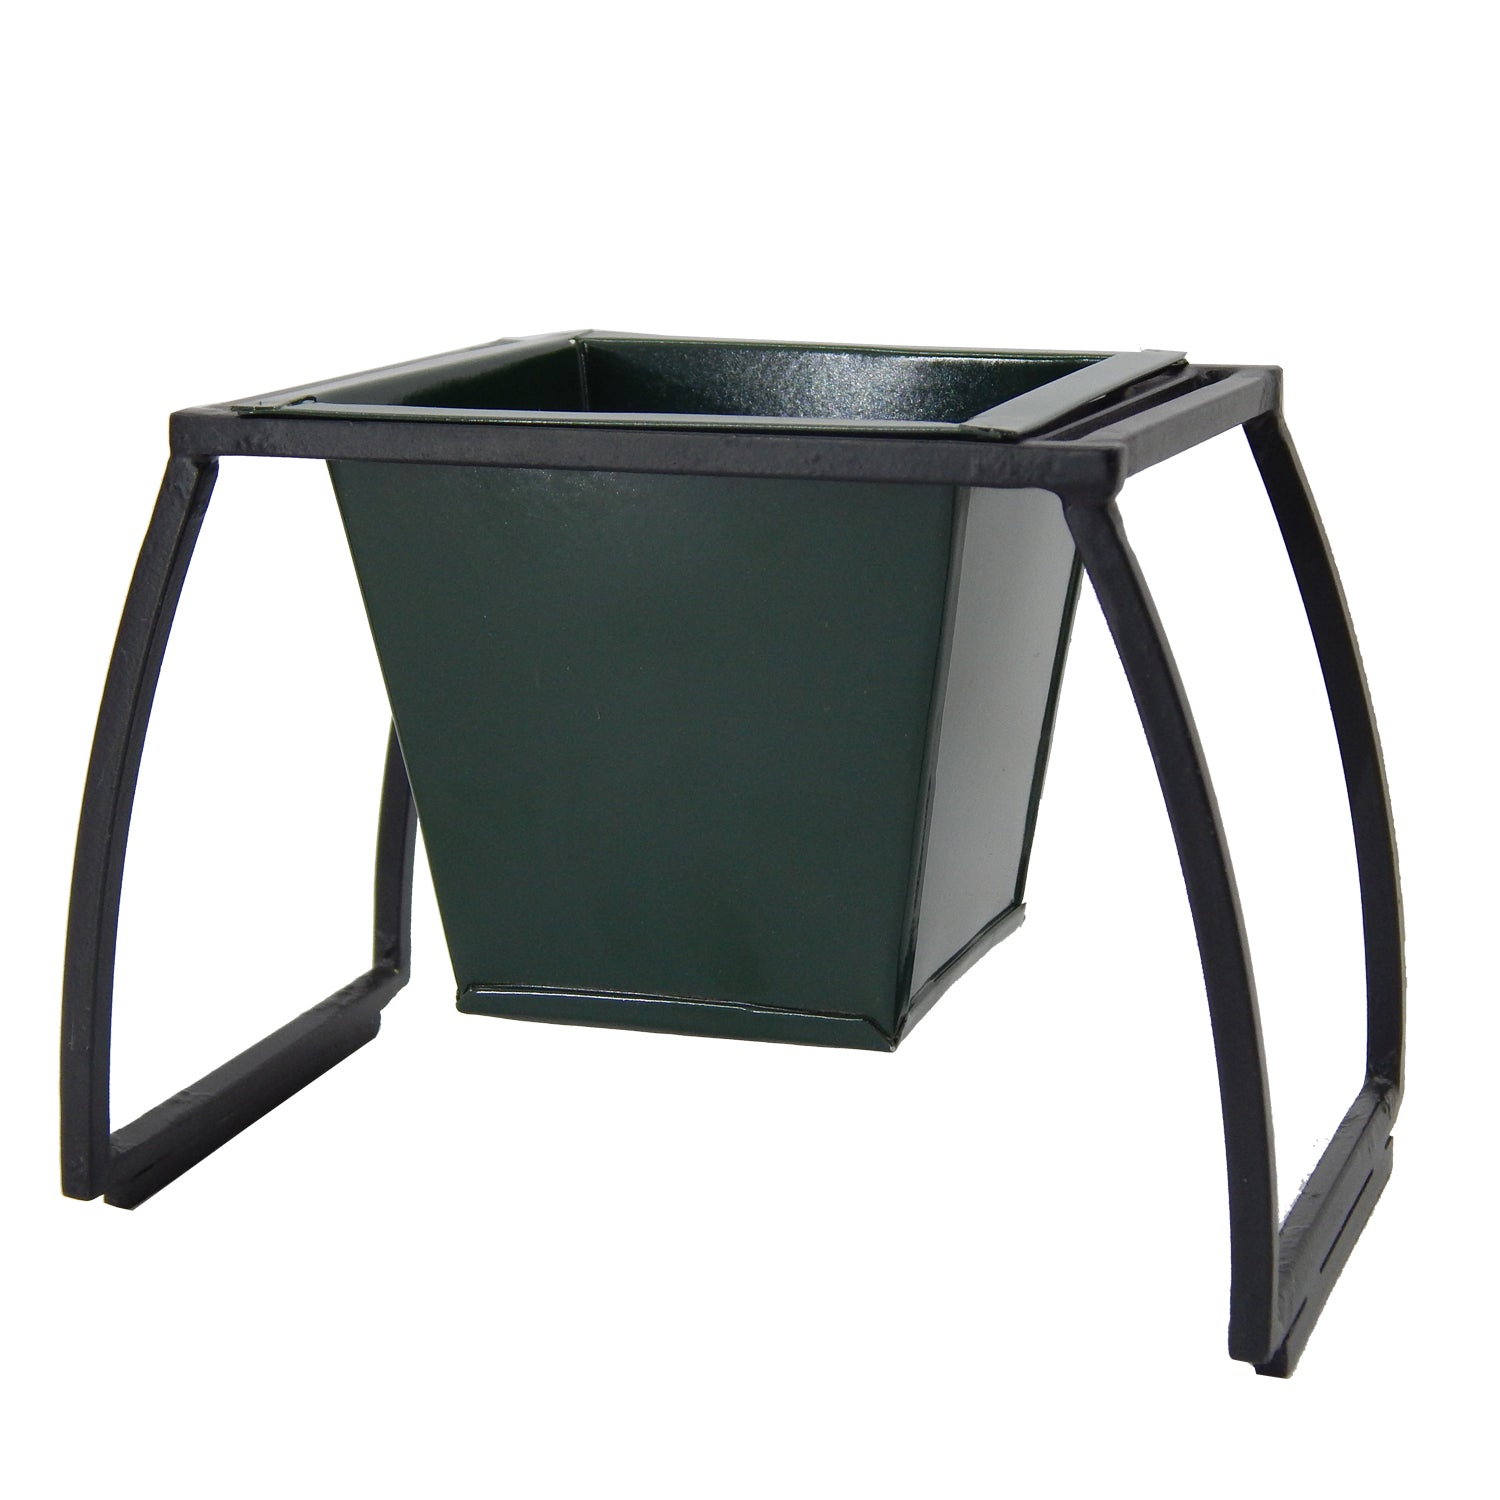 ecofynd Stackable Table Top Planter Pot with Metal Stand {WITHOUT PLANTS}, Multicolor Desktop Planter freeshipping - Ecofynd